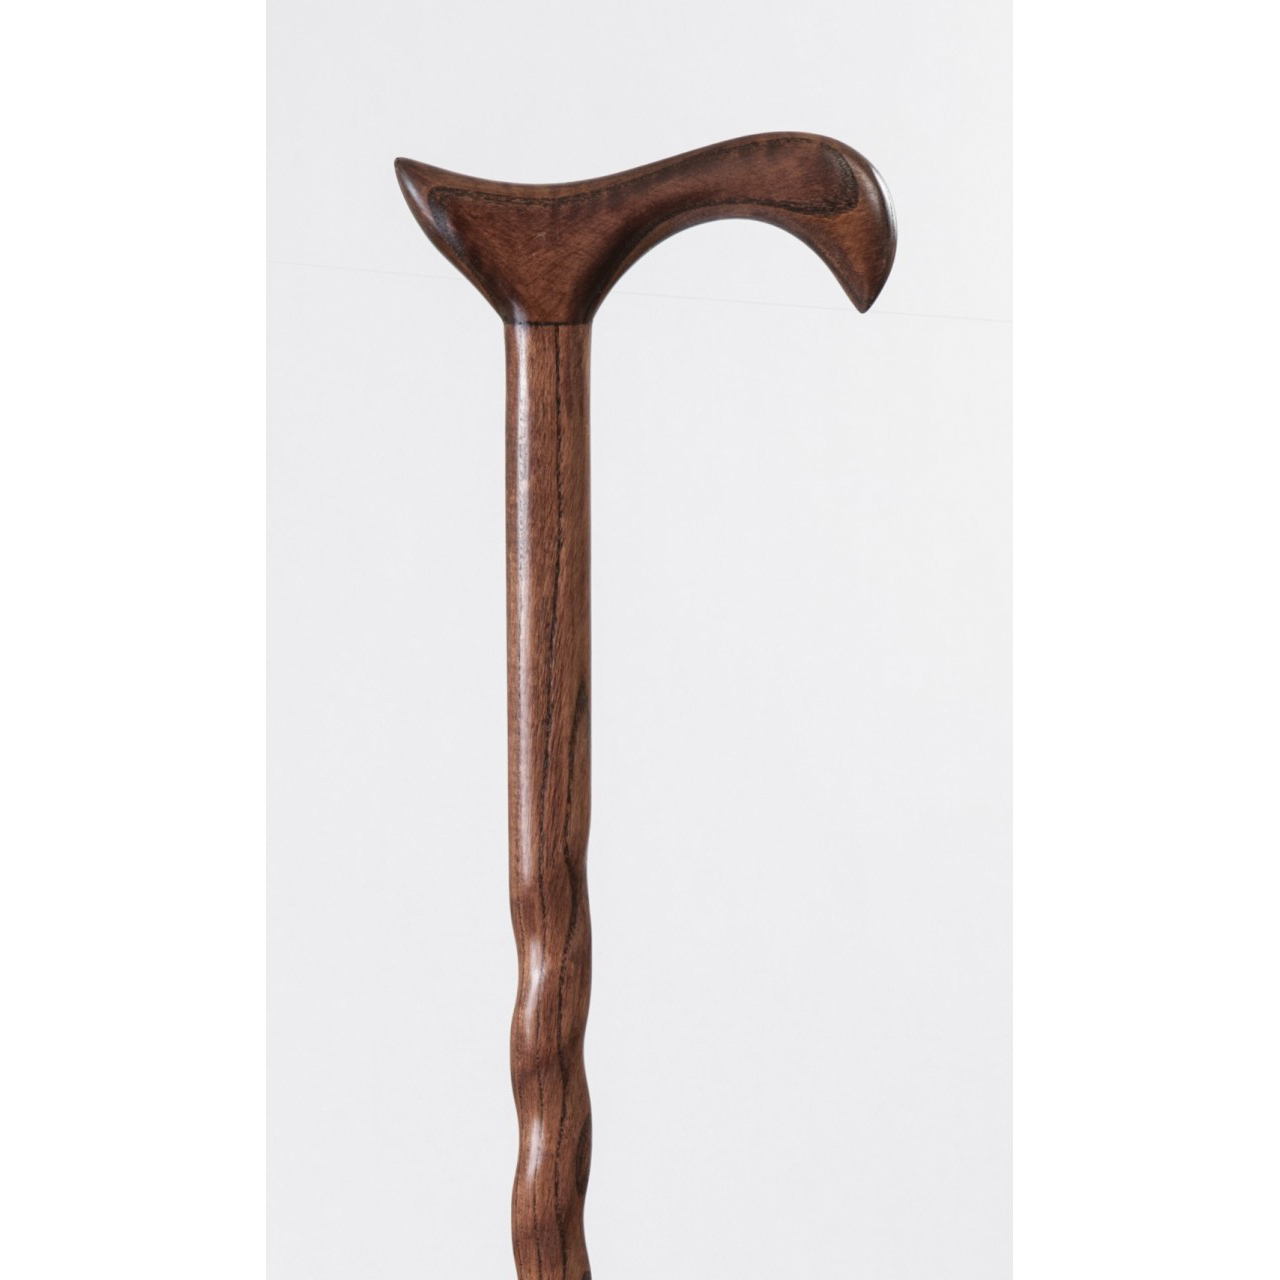 Brazos 502-3000-0051 Twisted Walking Cane, 34 in H Cane, Derby Handle, Wood Handle, Oak Wood, Red - 2